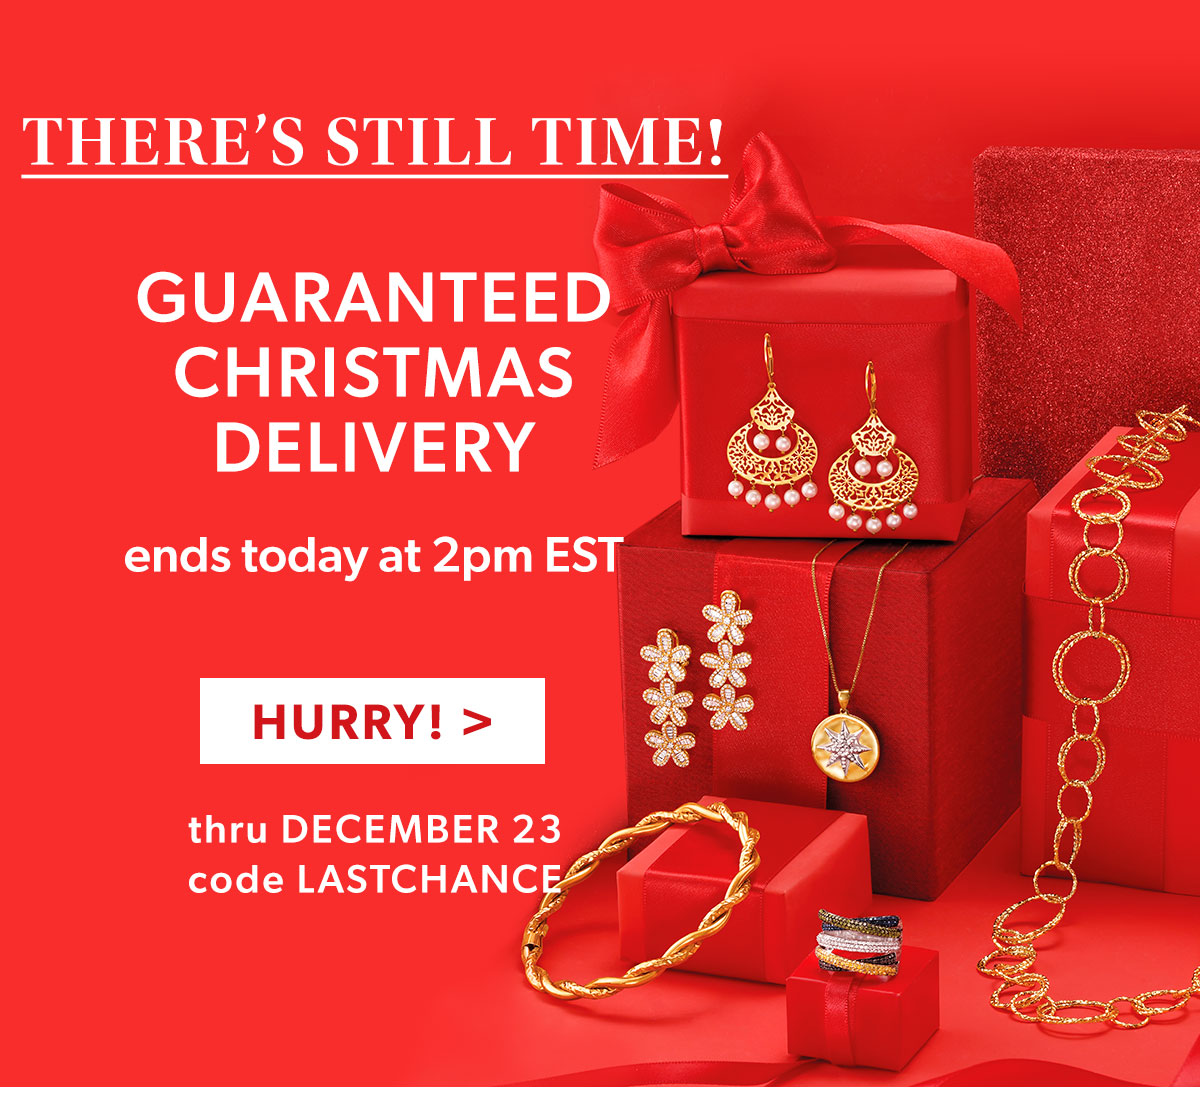 There is Still Time! Guaranteed Christmas Delivery Ends Today at 2pm EST. Hurry!